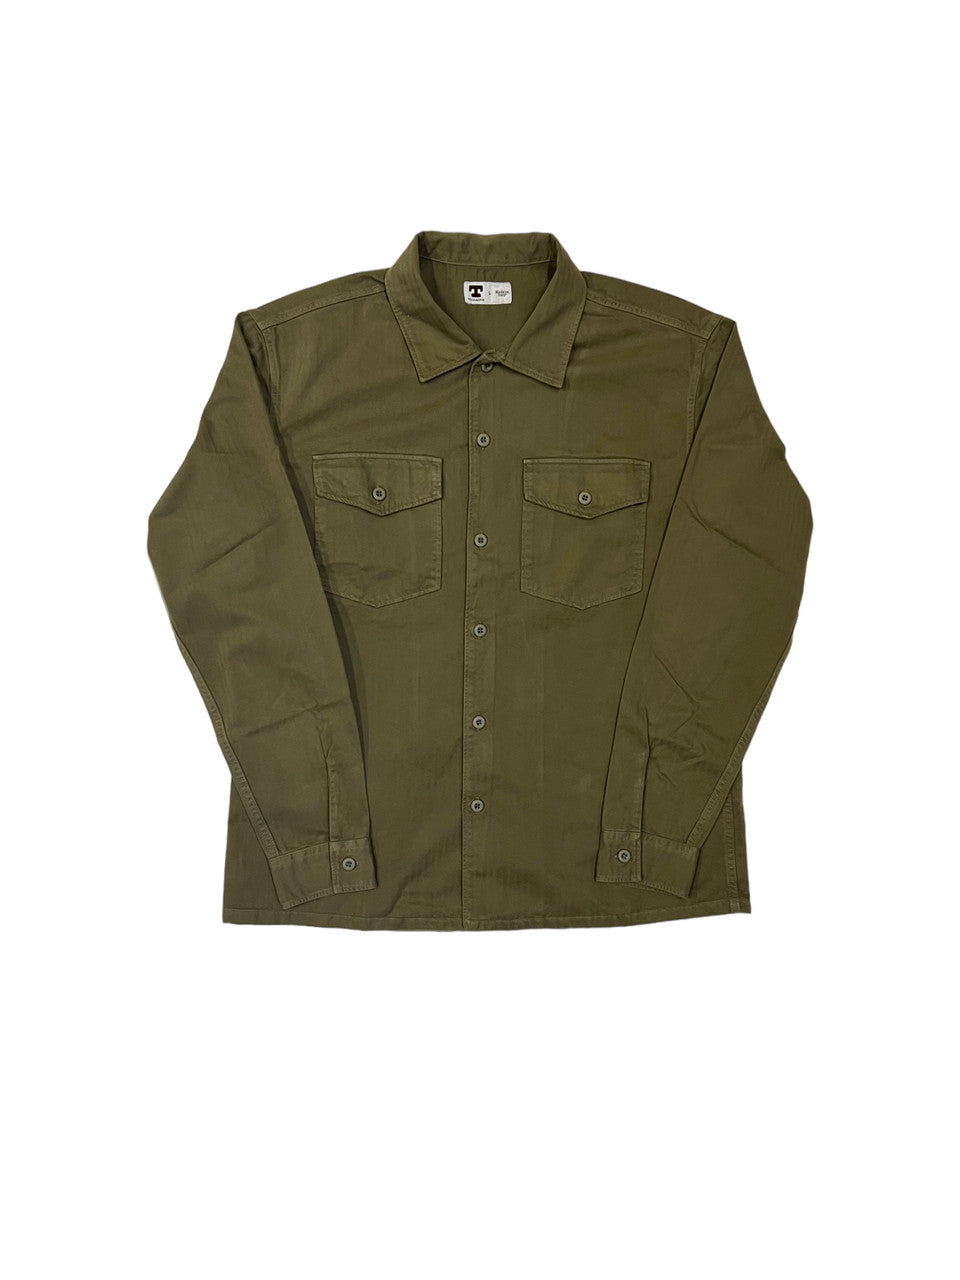 Fatigue Shirt in Olive